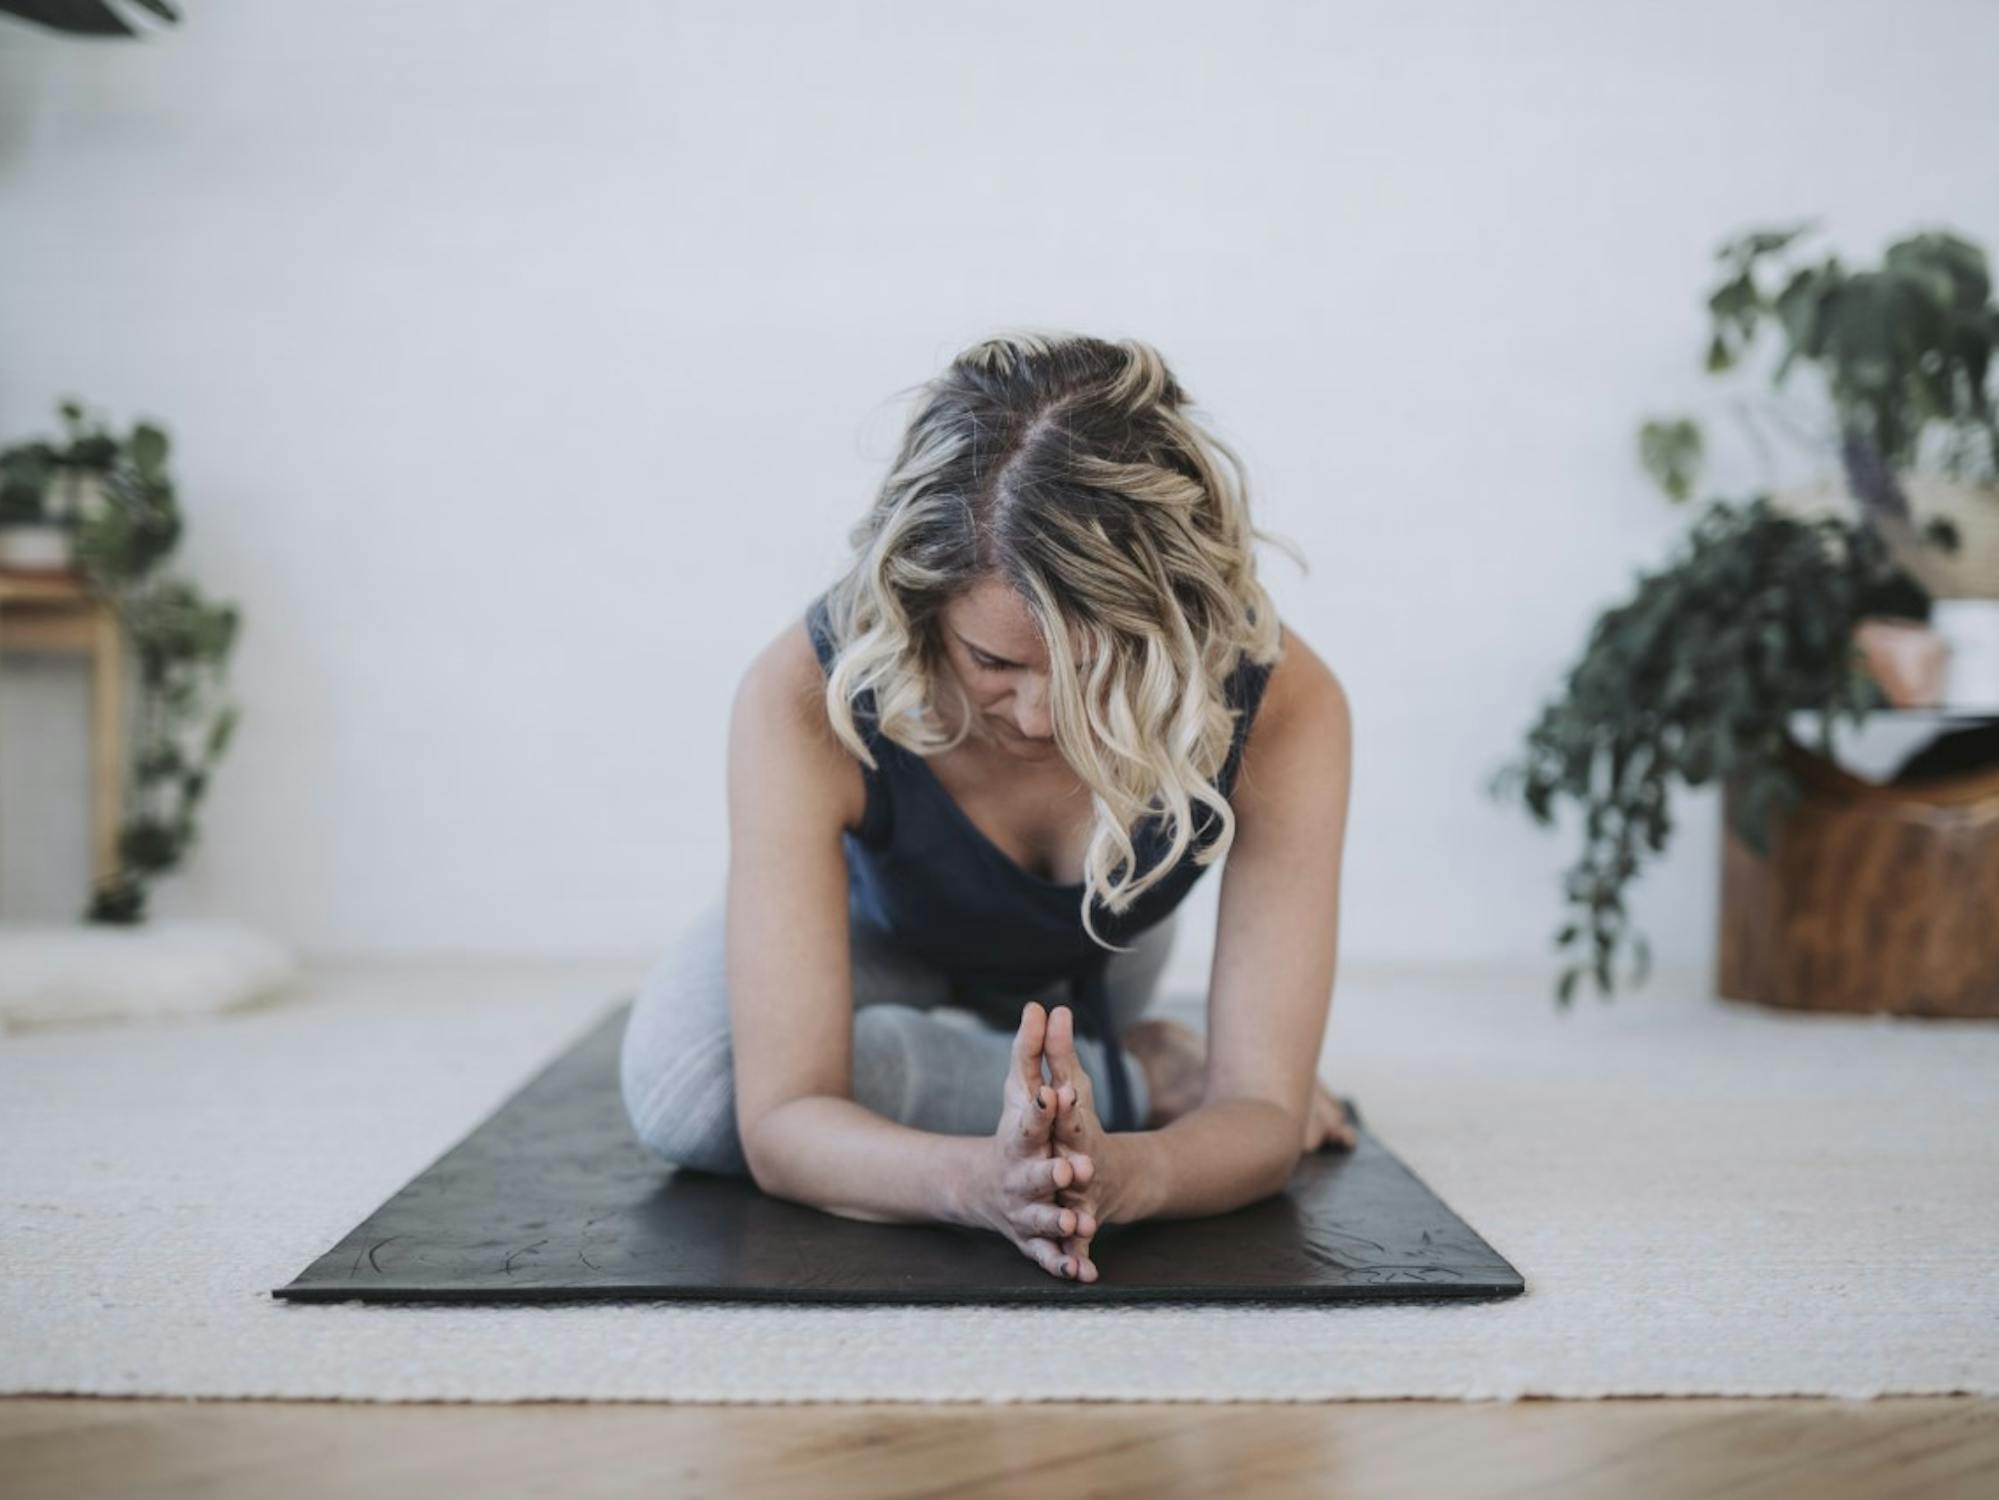 A woman poses on a yoga mat, focusing intently